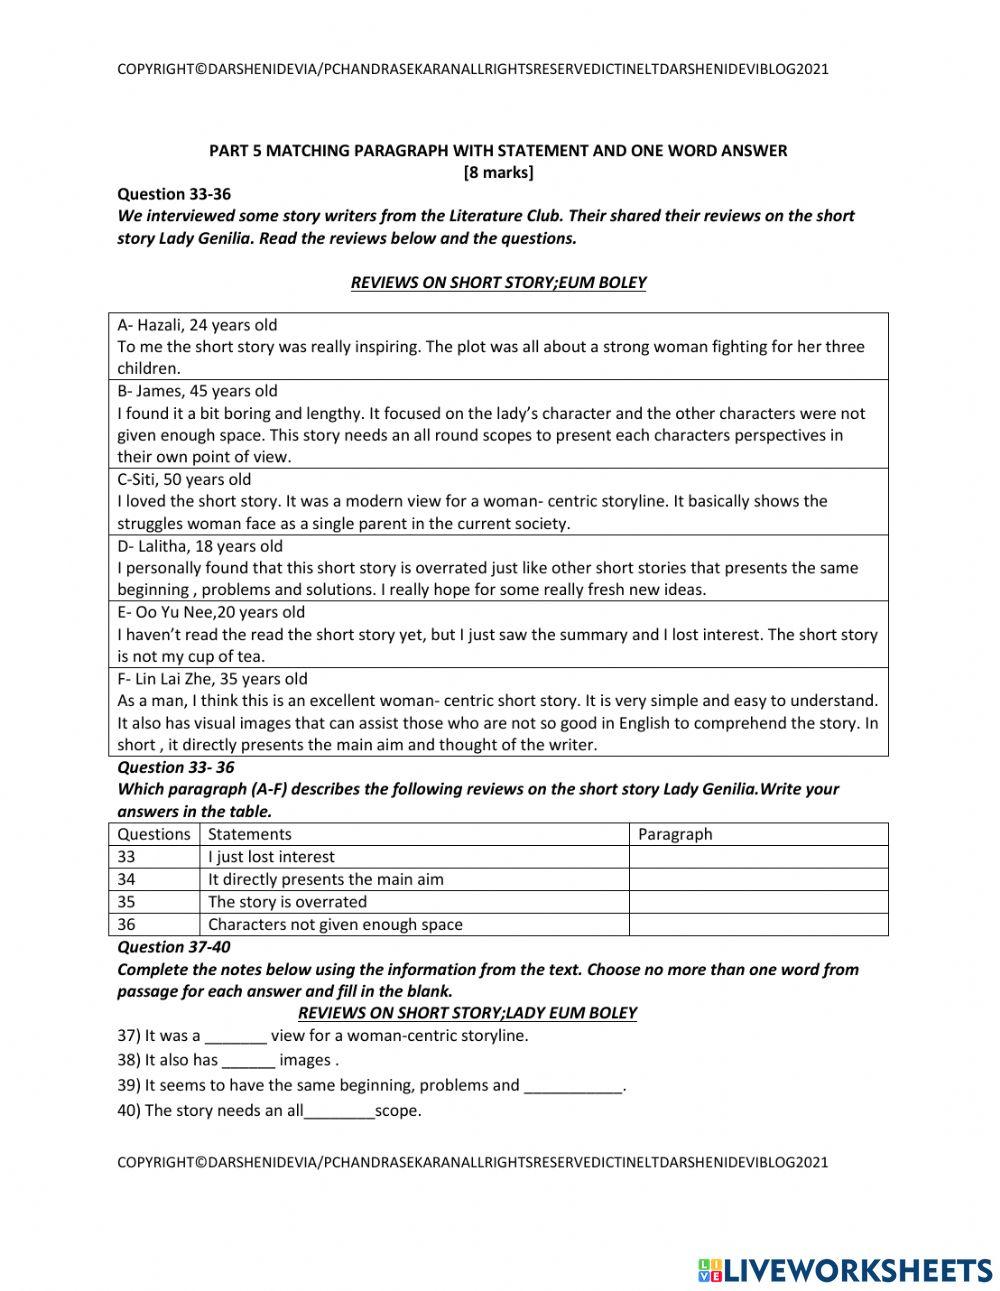 Spm cefr reading paper part 4 gapped text and part 5 new worksheets